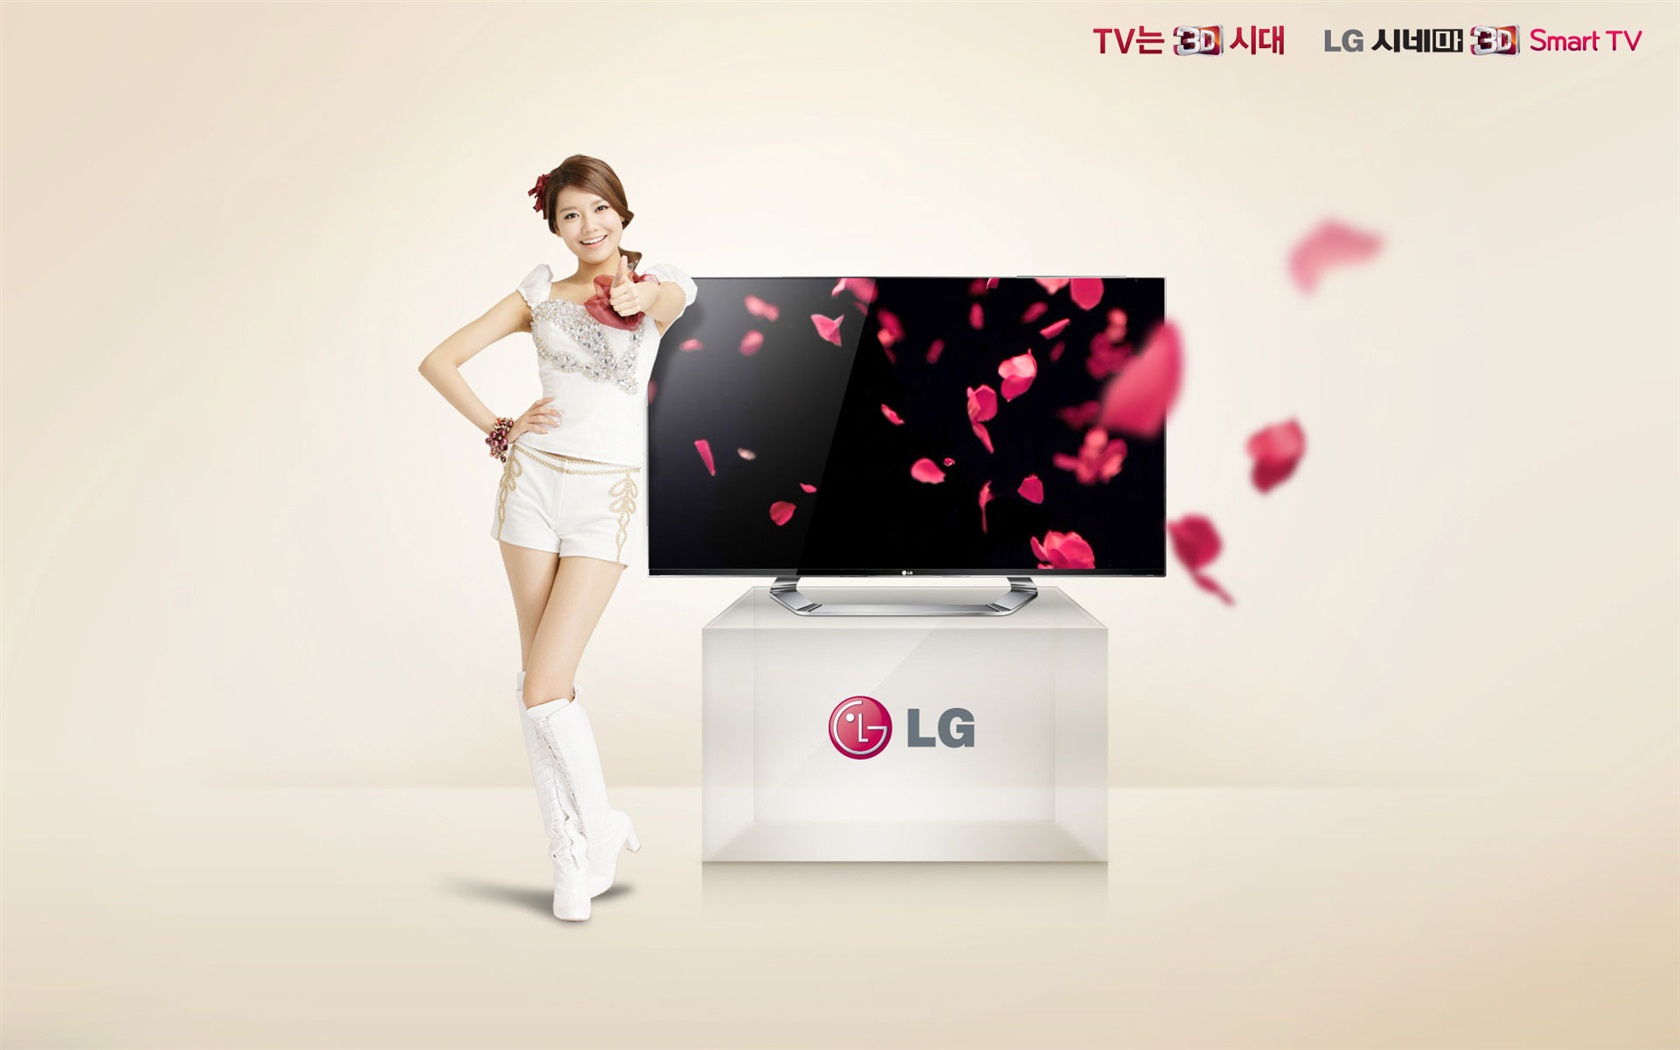 Girls Generation ACE and LG endorsements ads HD wallpapers #12 - 1680x1050